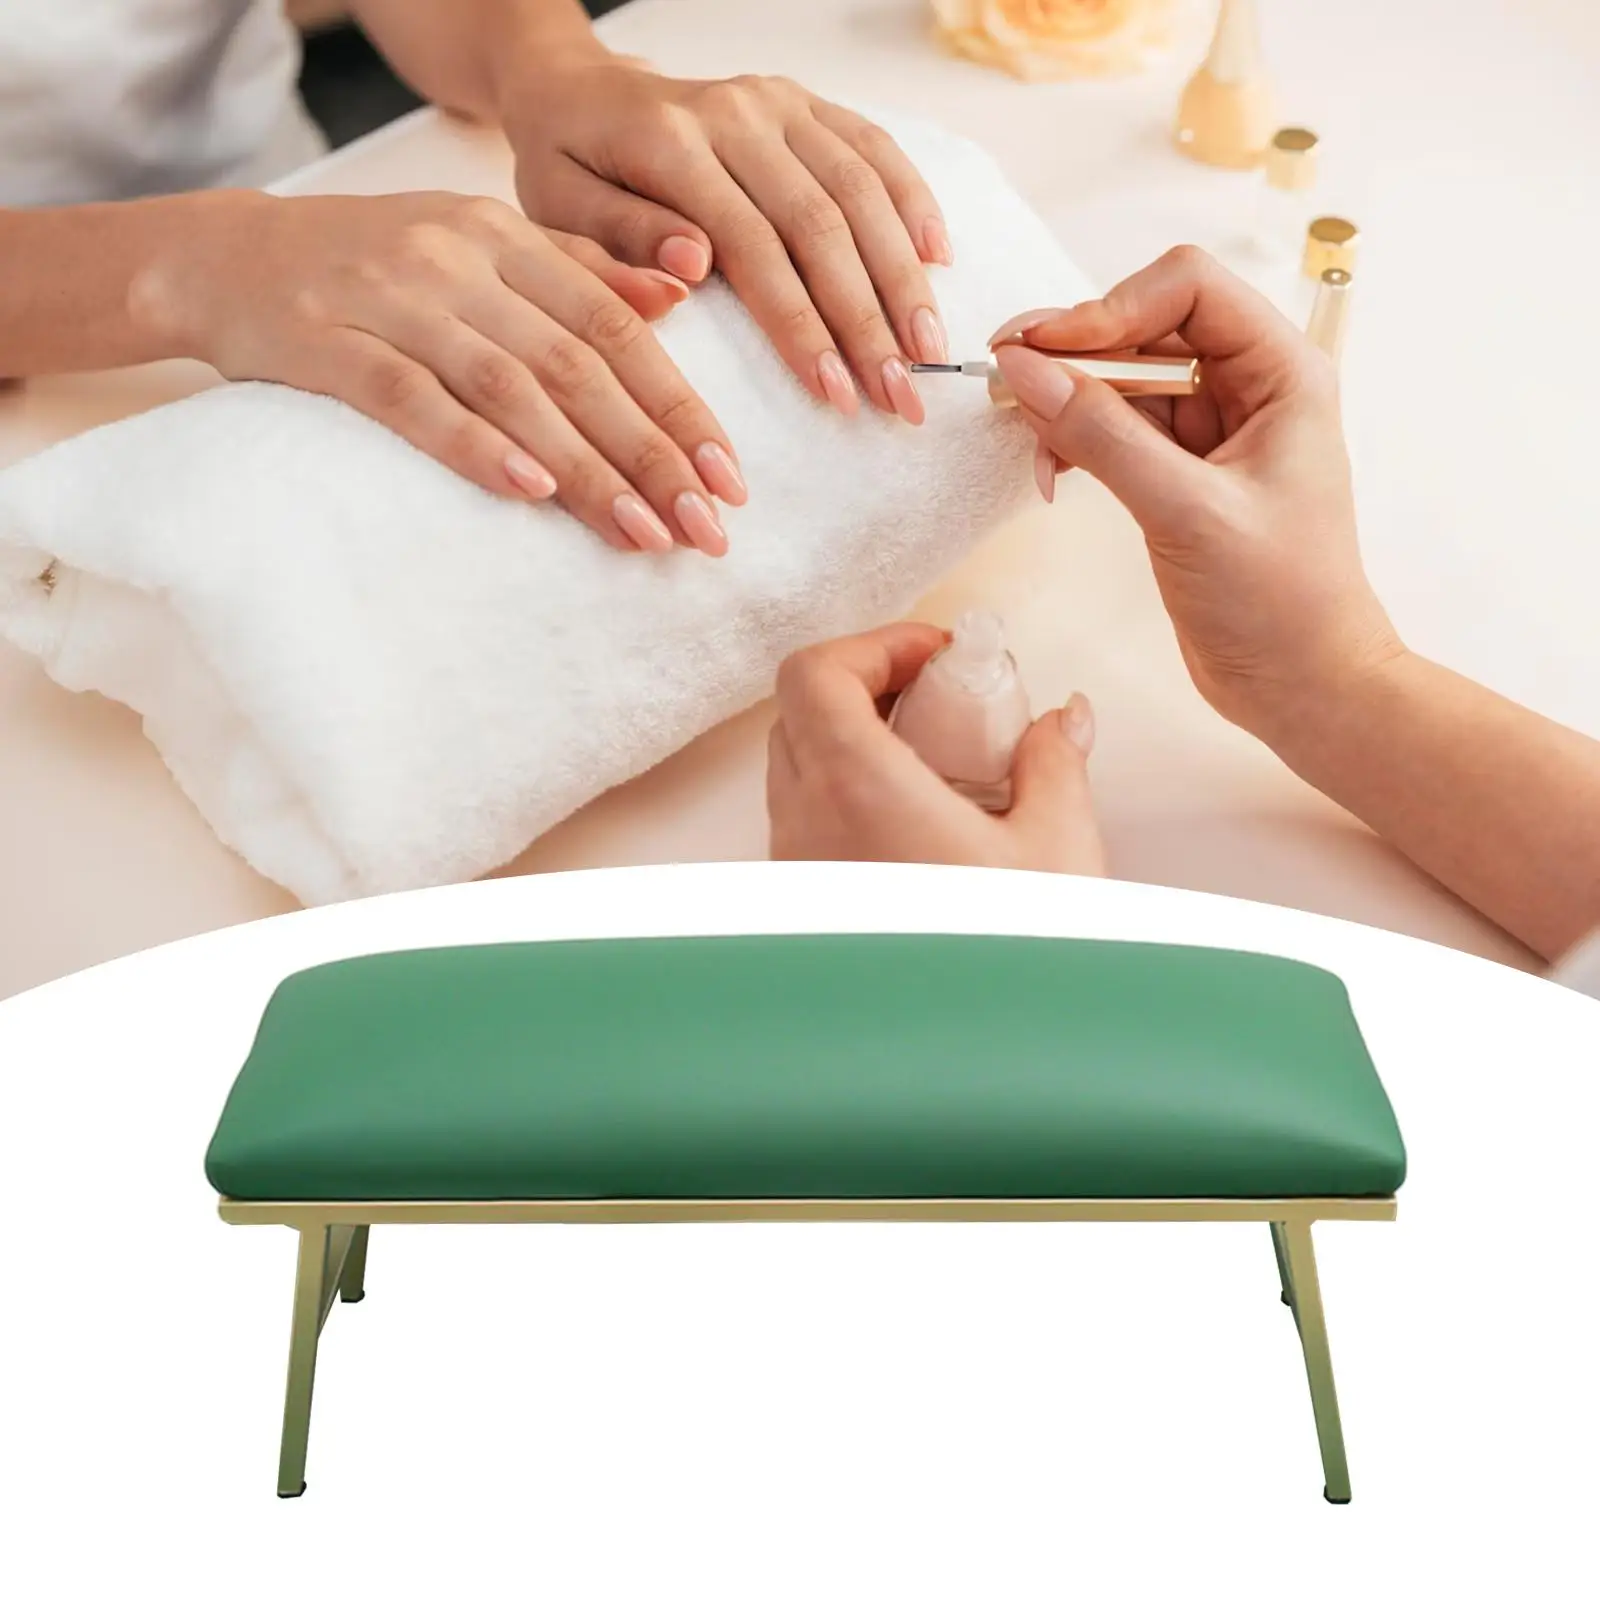 Nail Arm Rest PU Leather Professional Table Accessories Manicure Hand Pillow for Manicurist Hand Nail Technician Use Arm